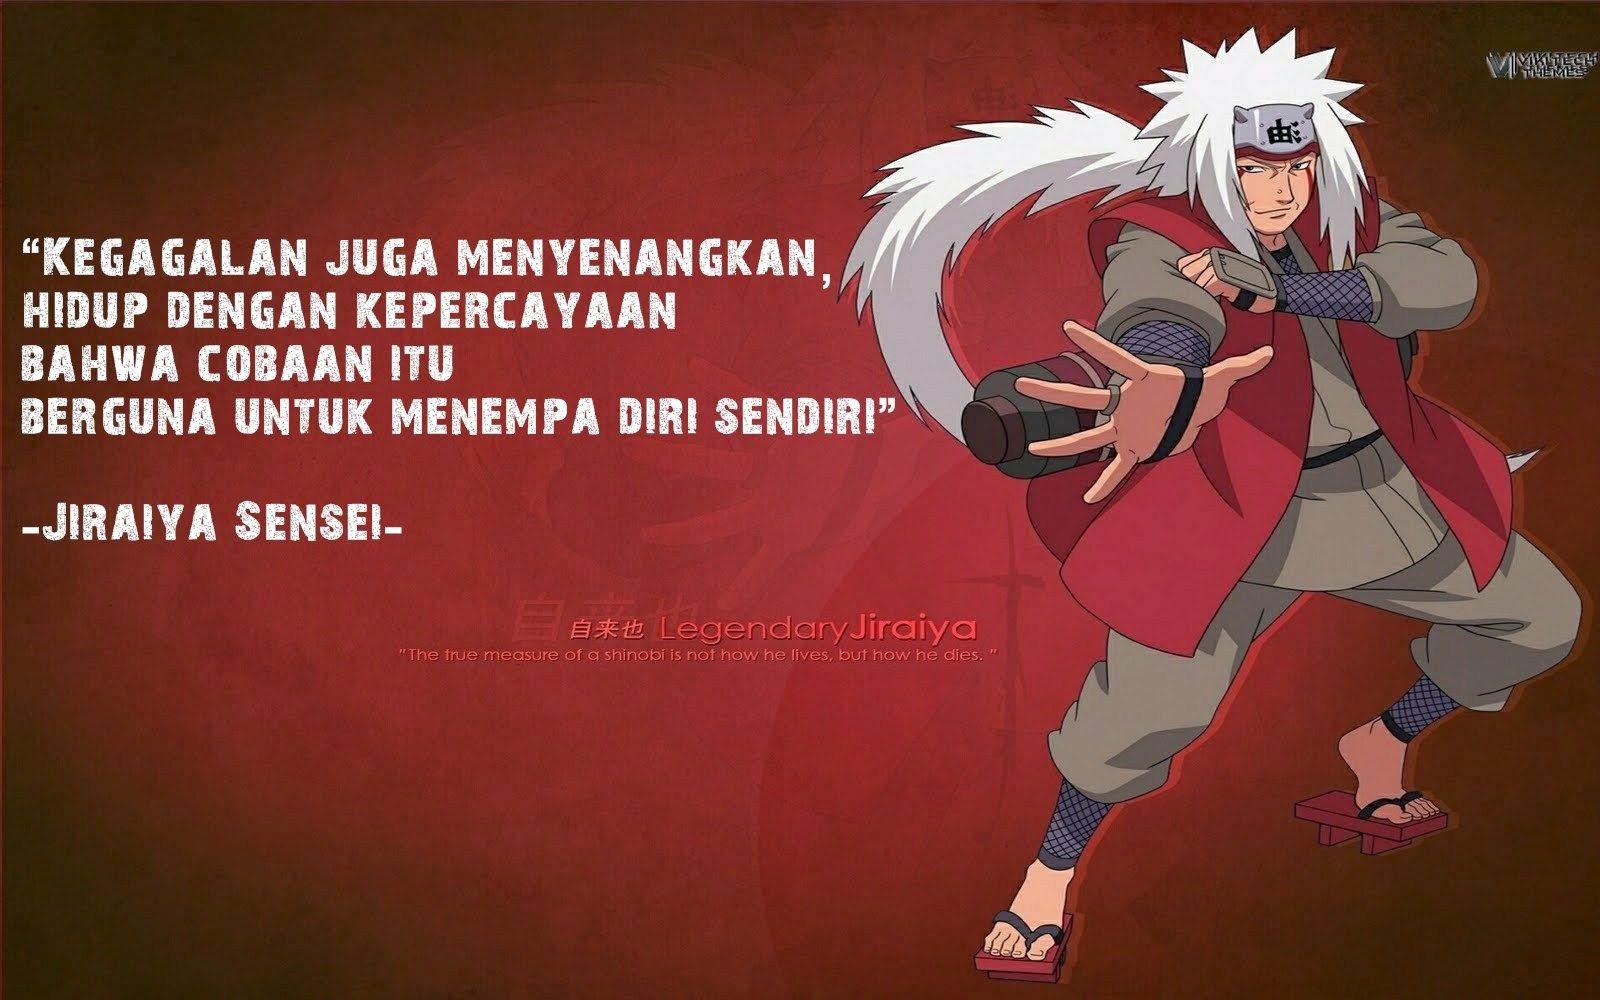 Naruto Emotional Quotes Wallpapers